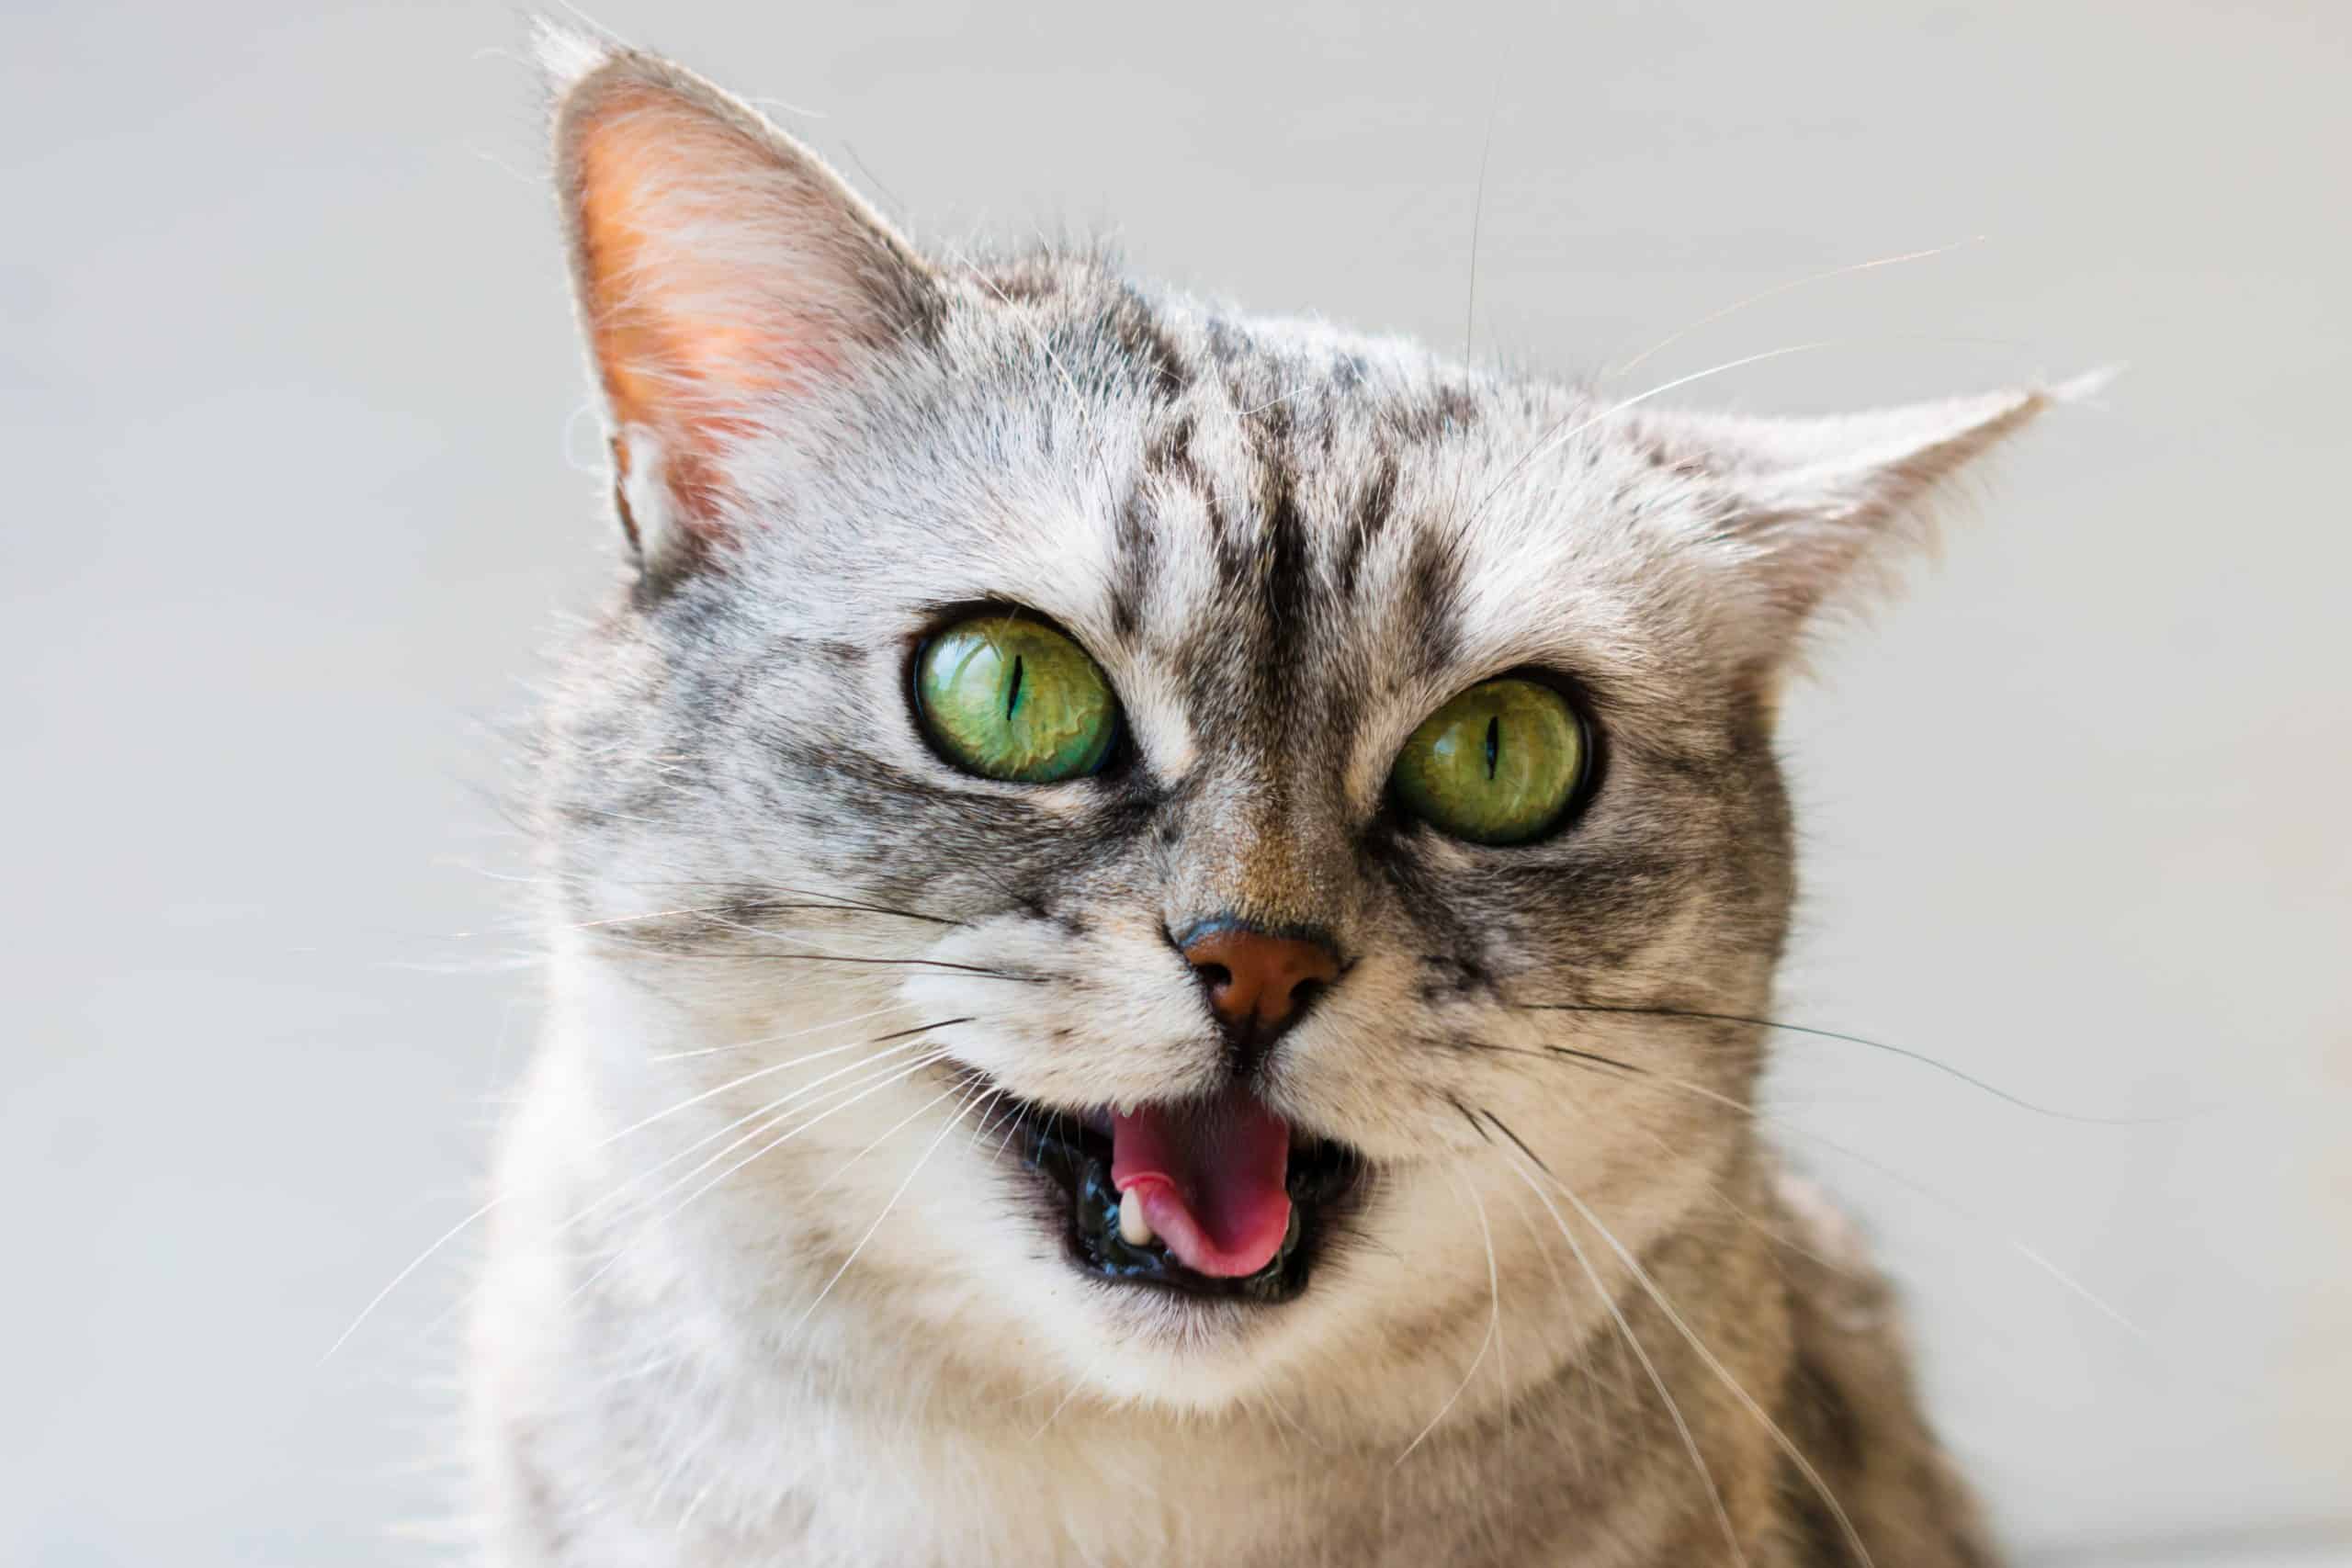 young british cat open mouth say meow. Portrait of emotional British cat with bright green eyes on white background